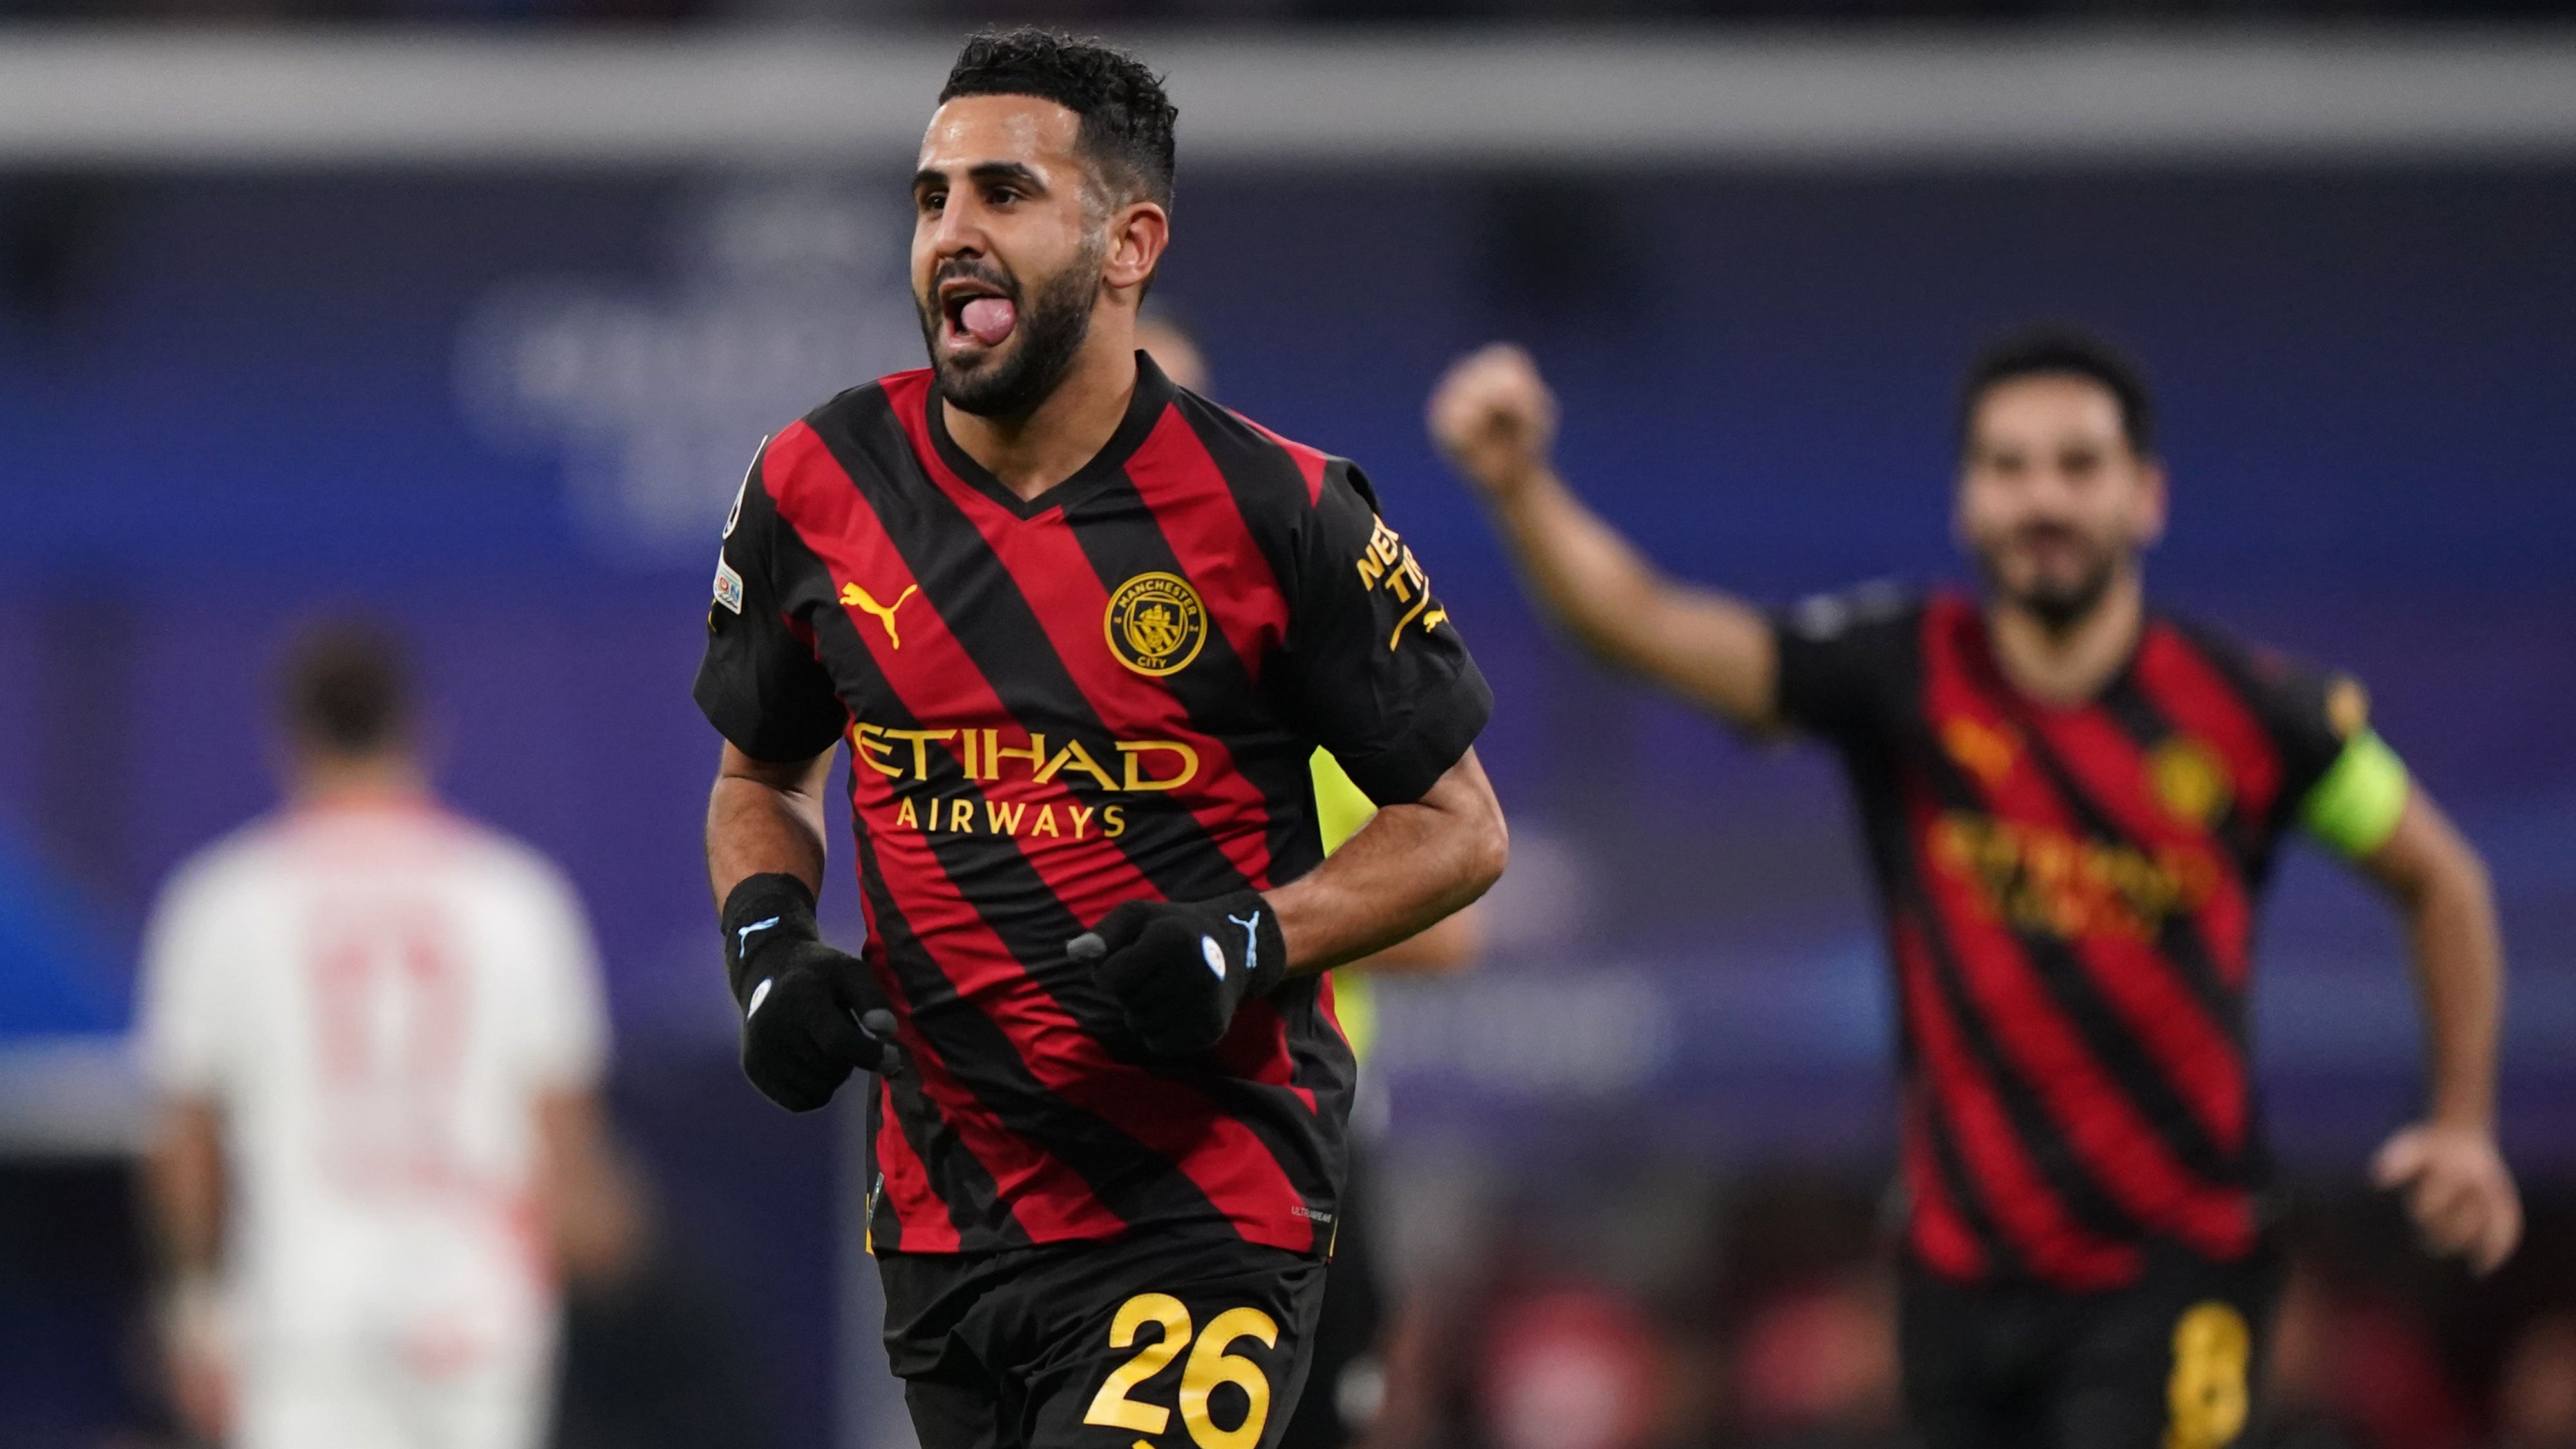 Manchester City’s Riyad Mahrez celebrates scoring in his side’s 1-1 Champions League draw at RB Leipzig (Tim Goode/PA)